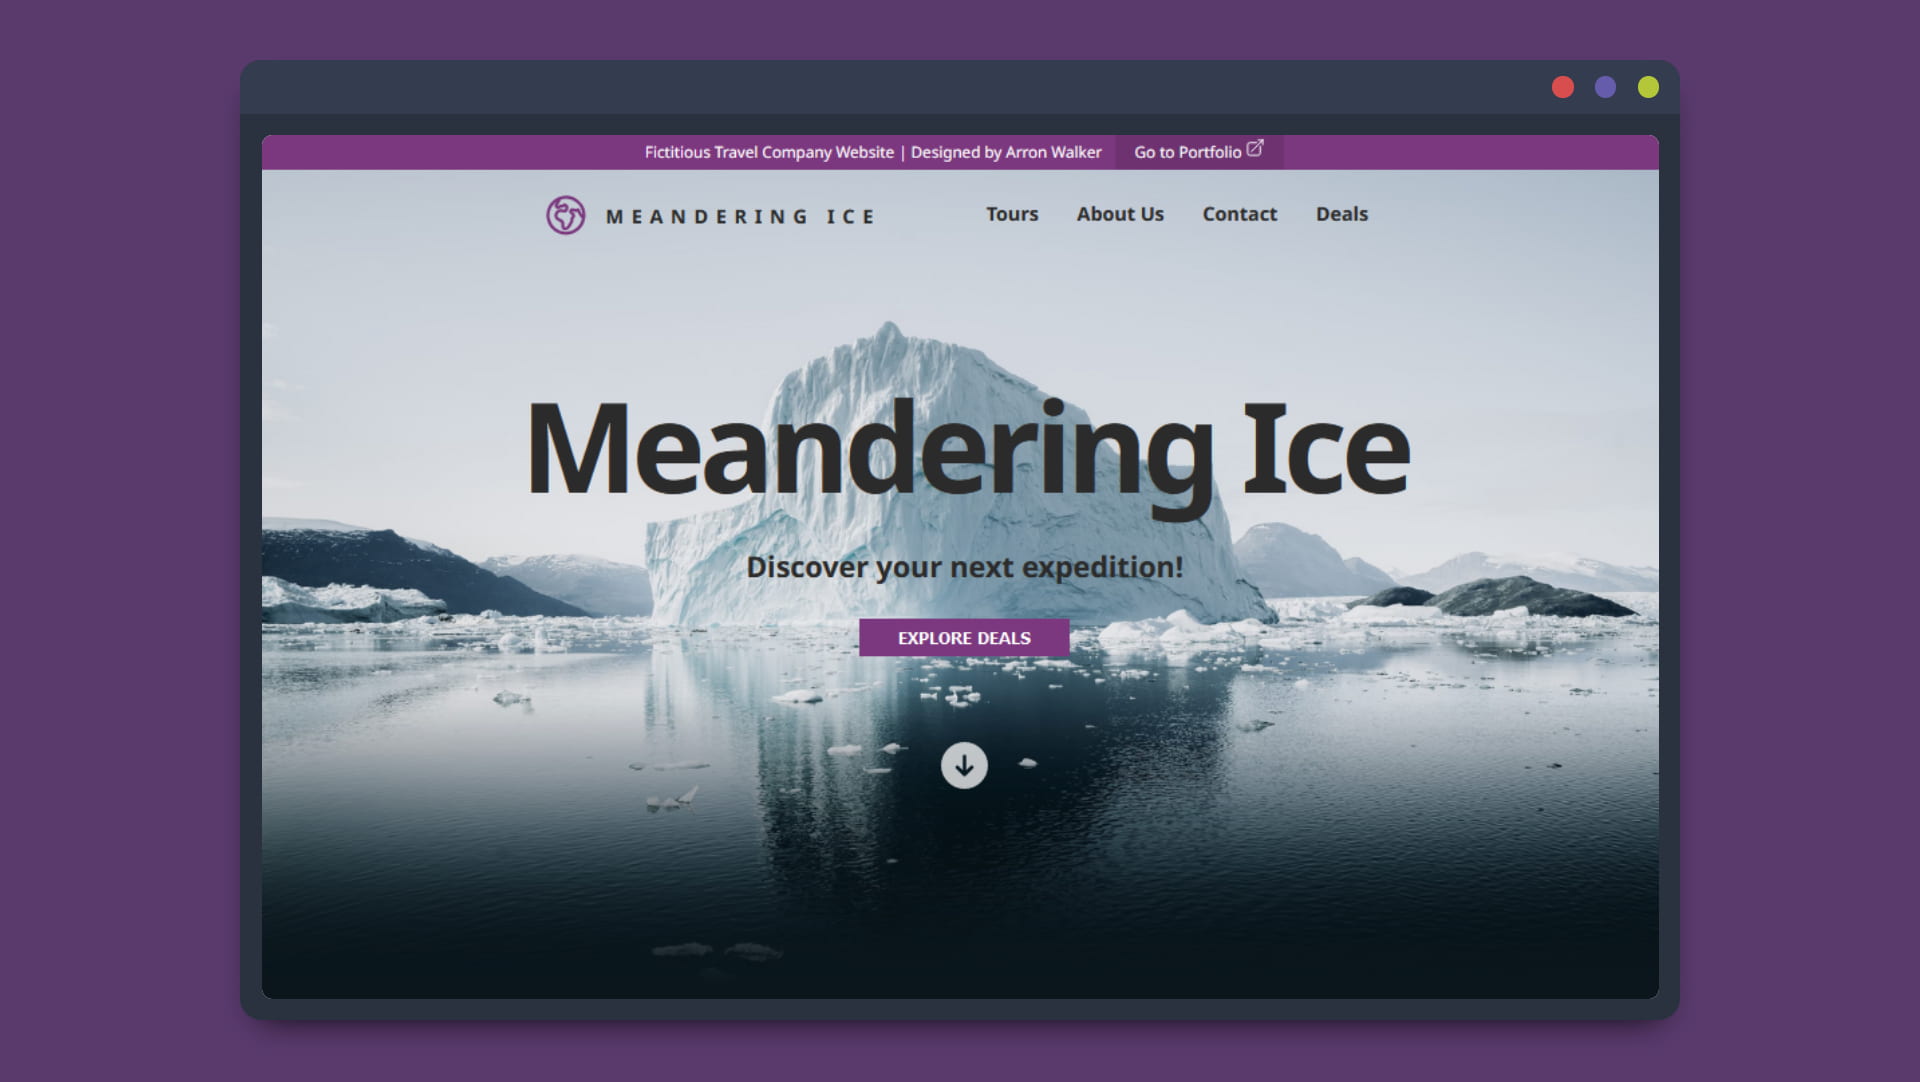 screen shot of fictitious arctic travel site